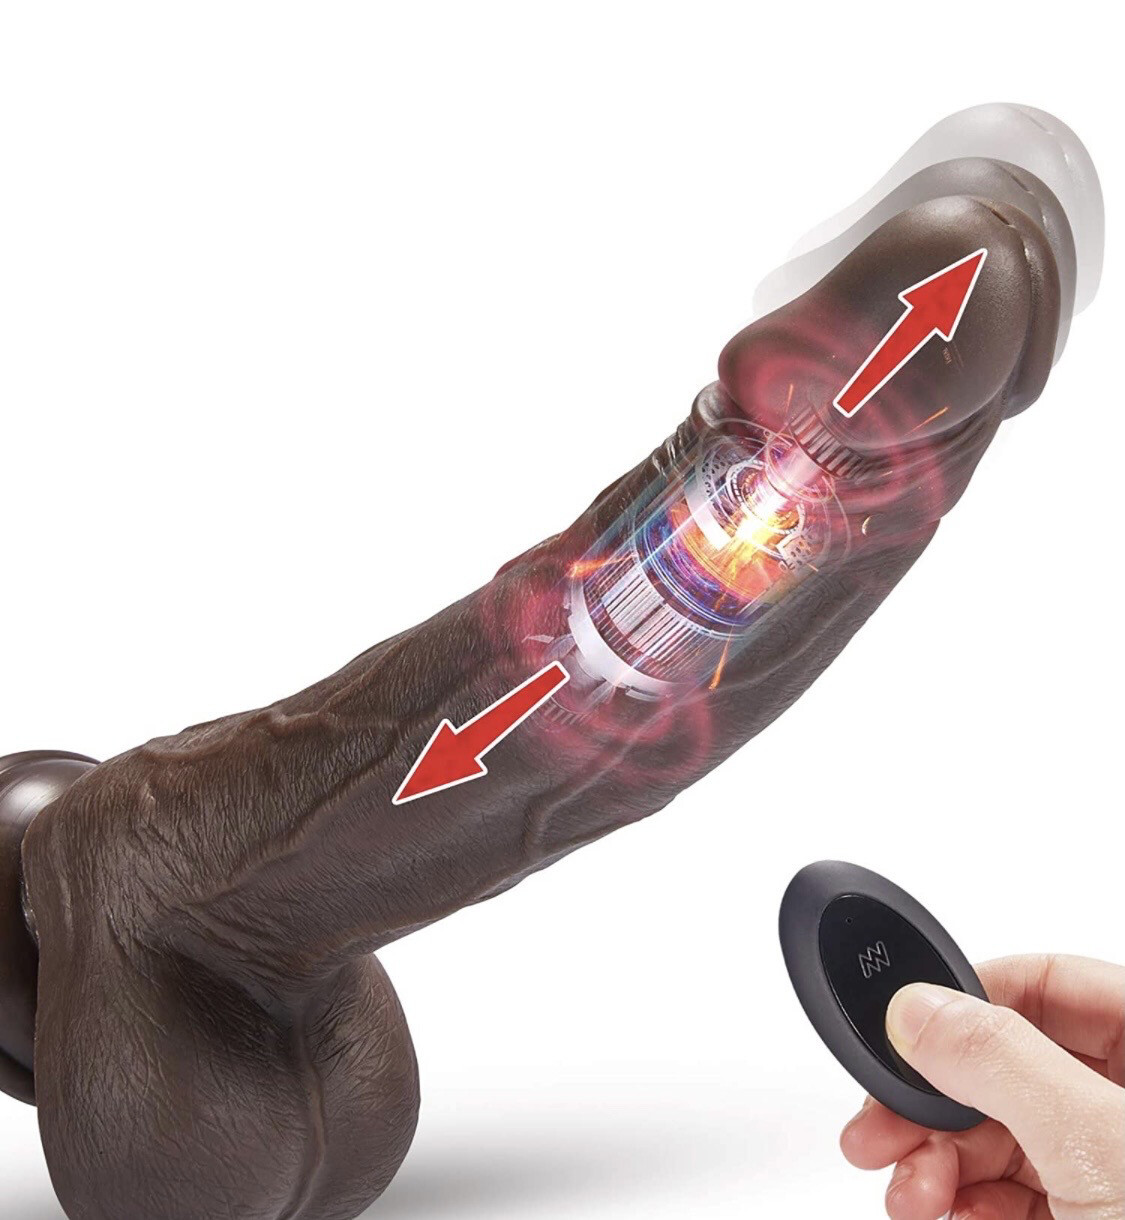 Using thick sex toy for anal sex